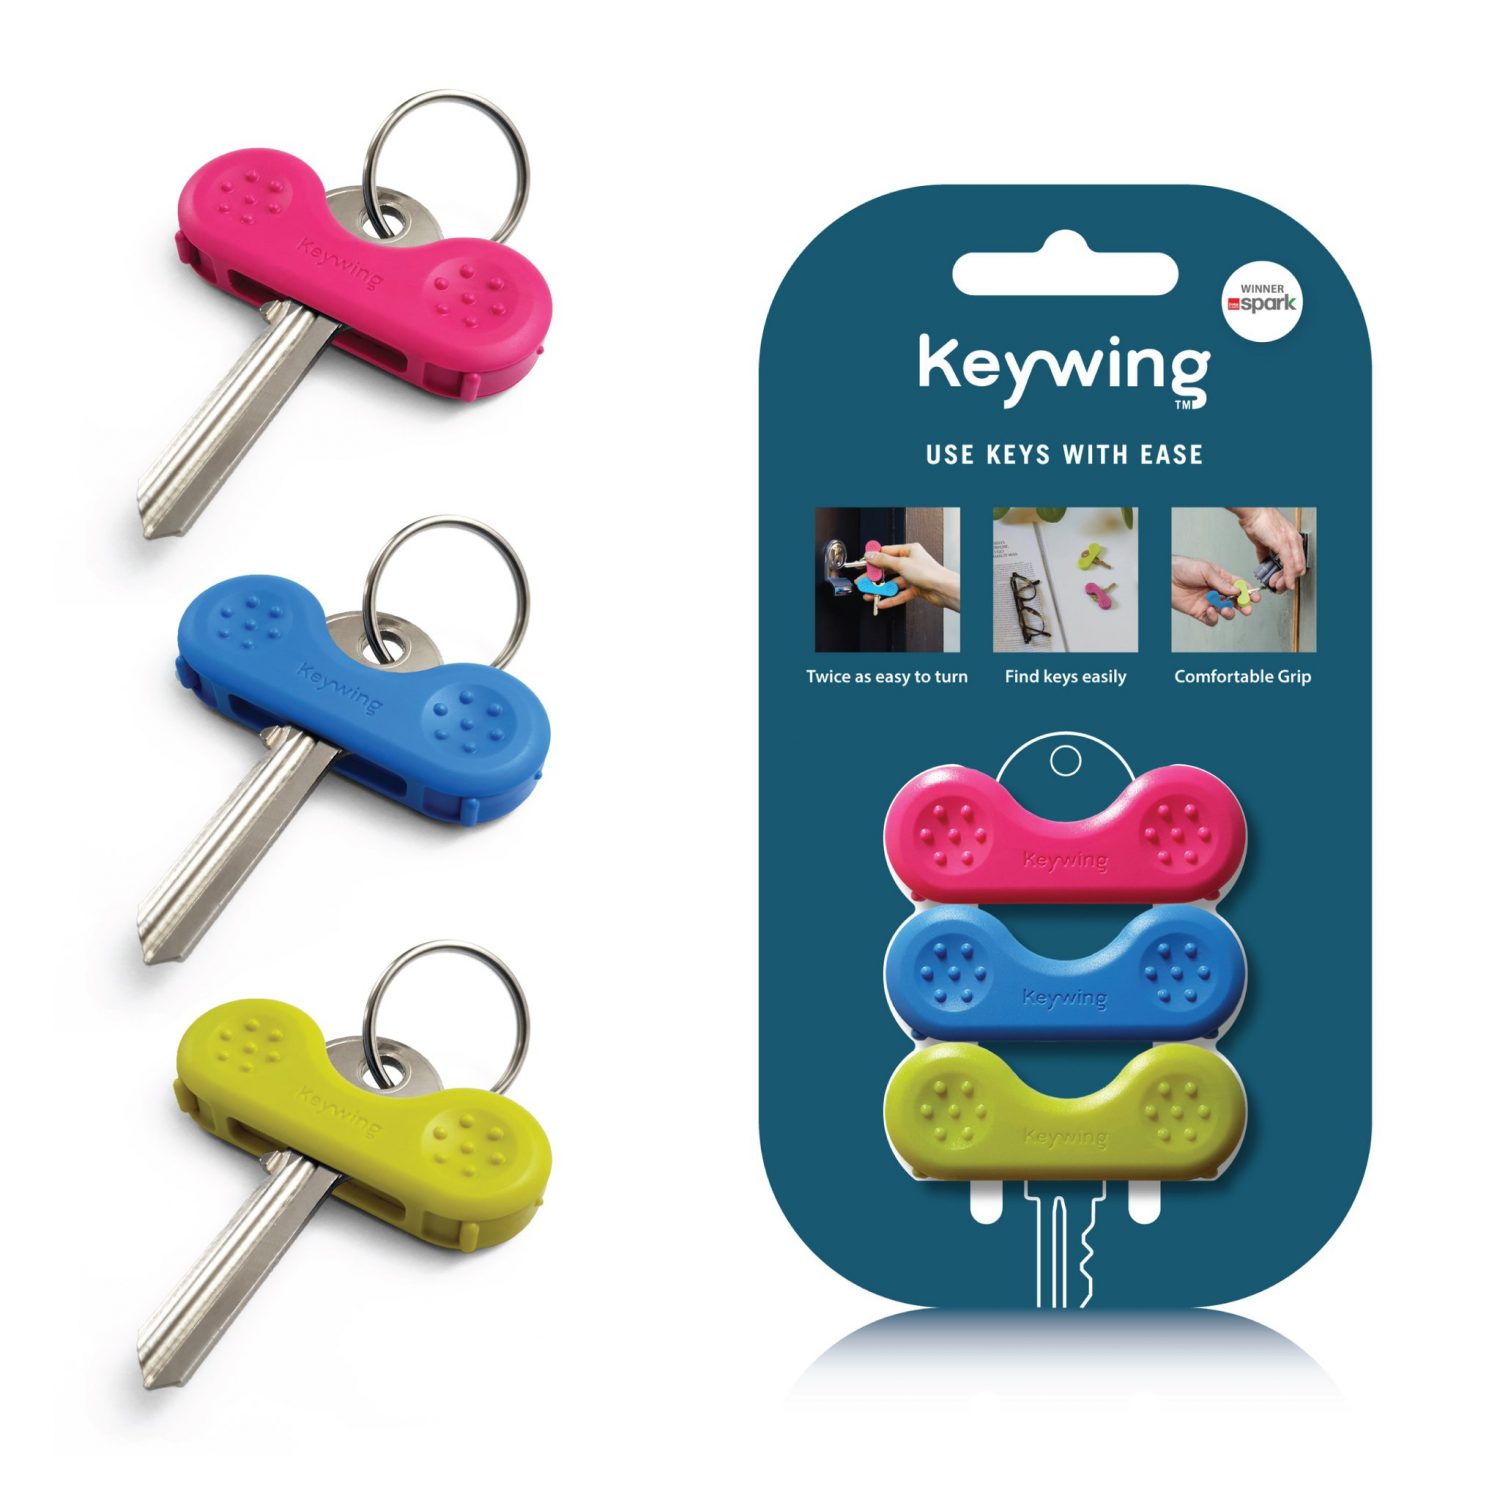 Three Keywing tools in pink, blue and yellow on keys